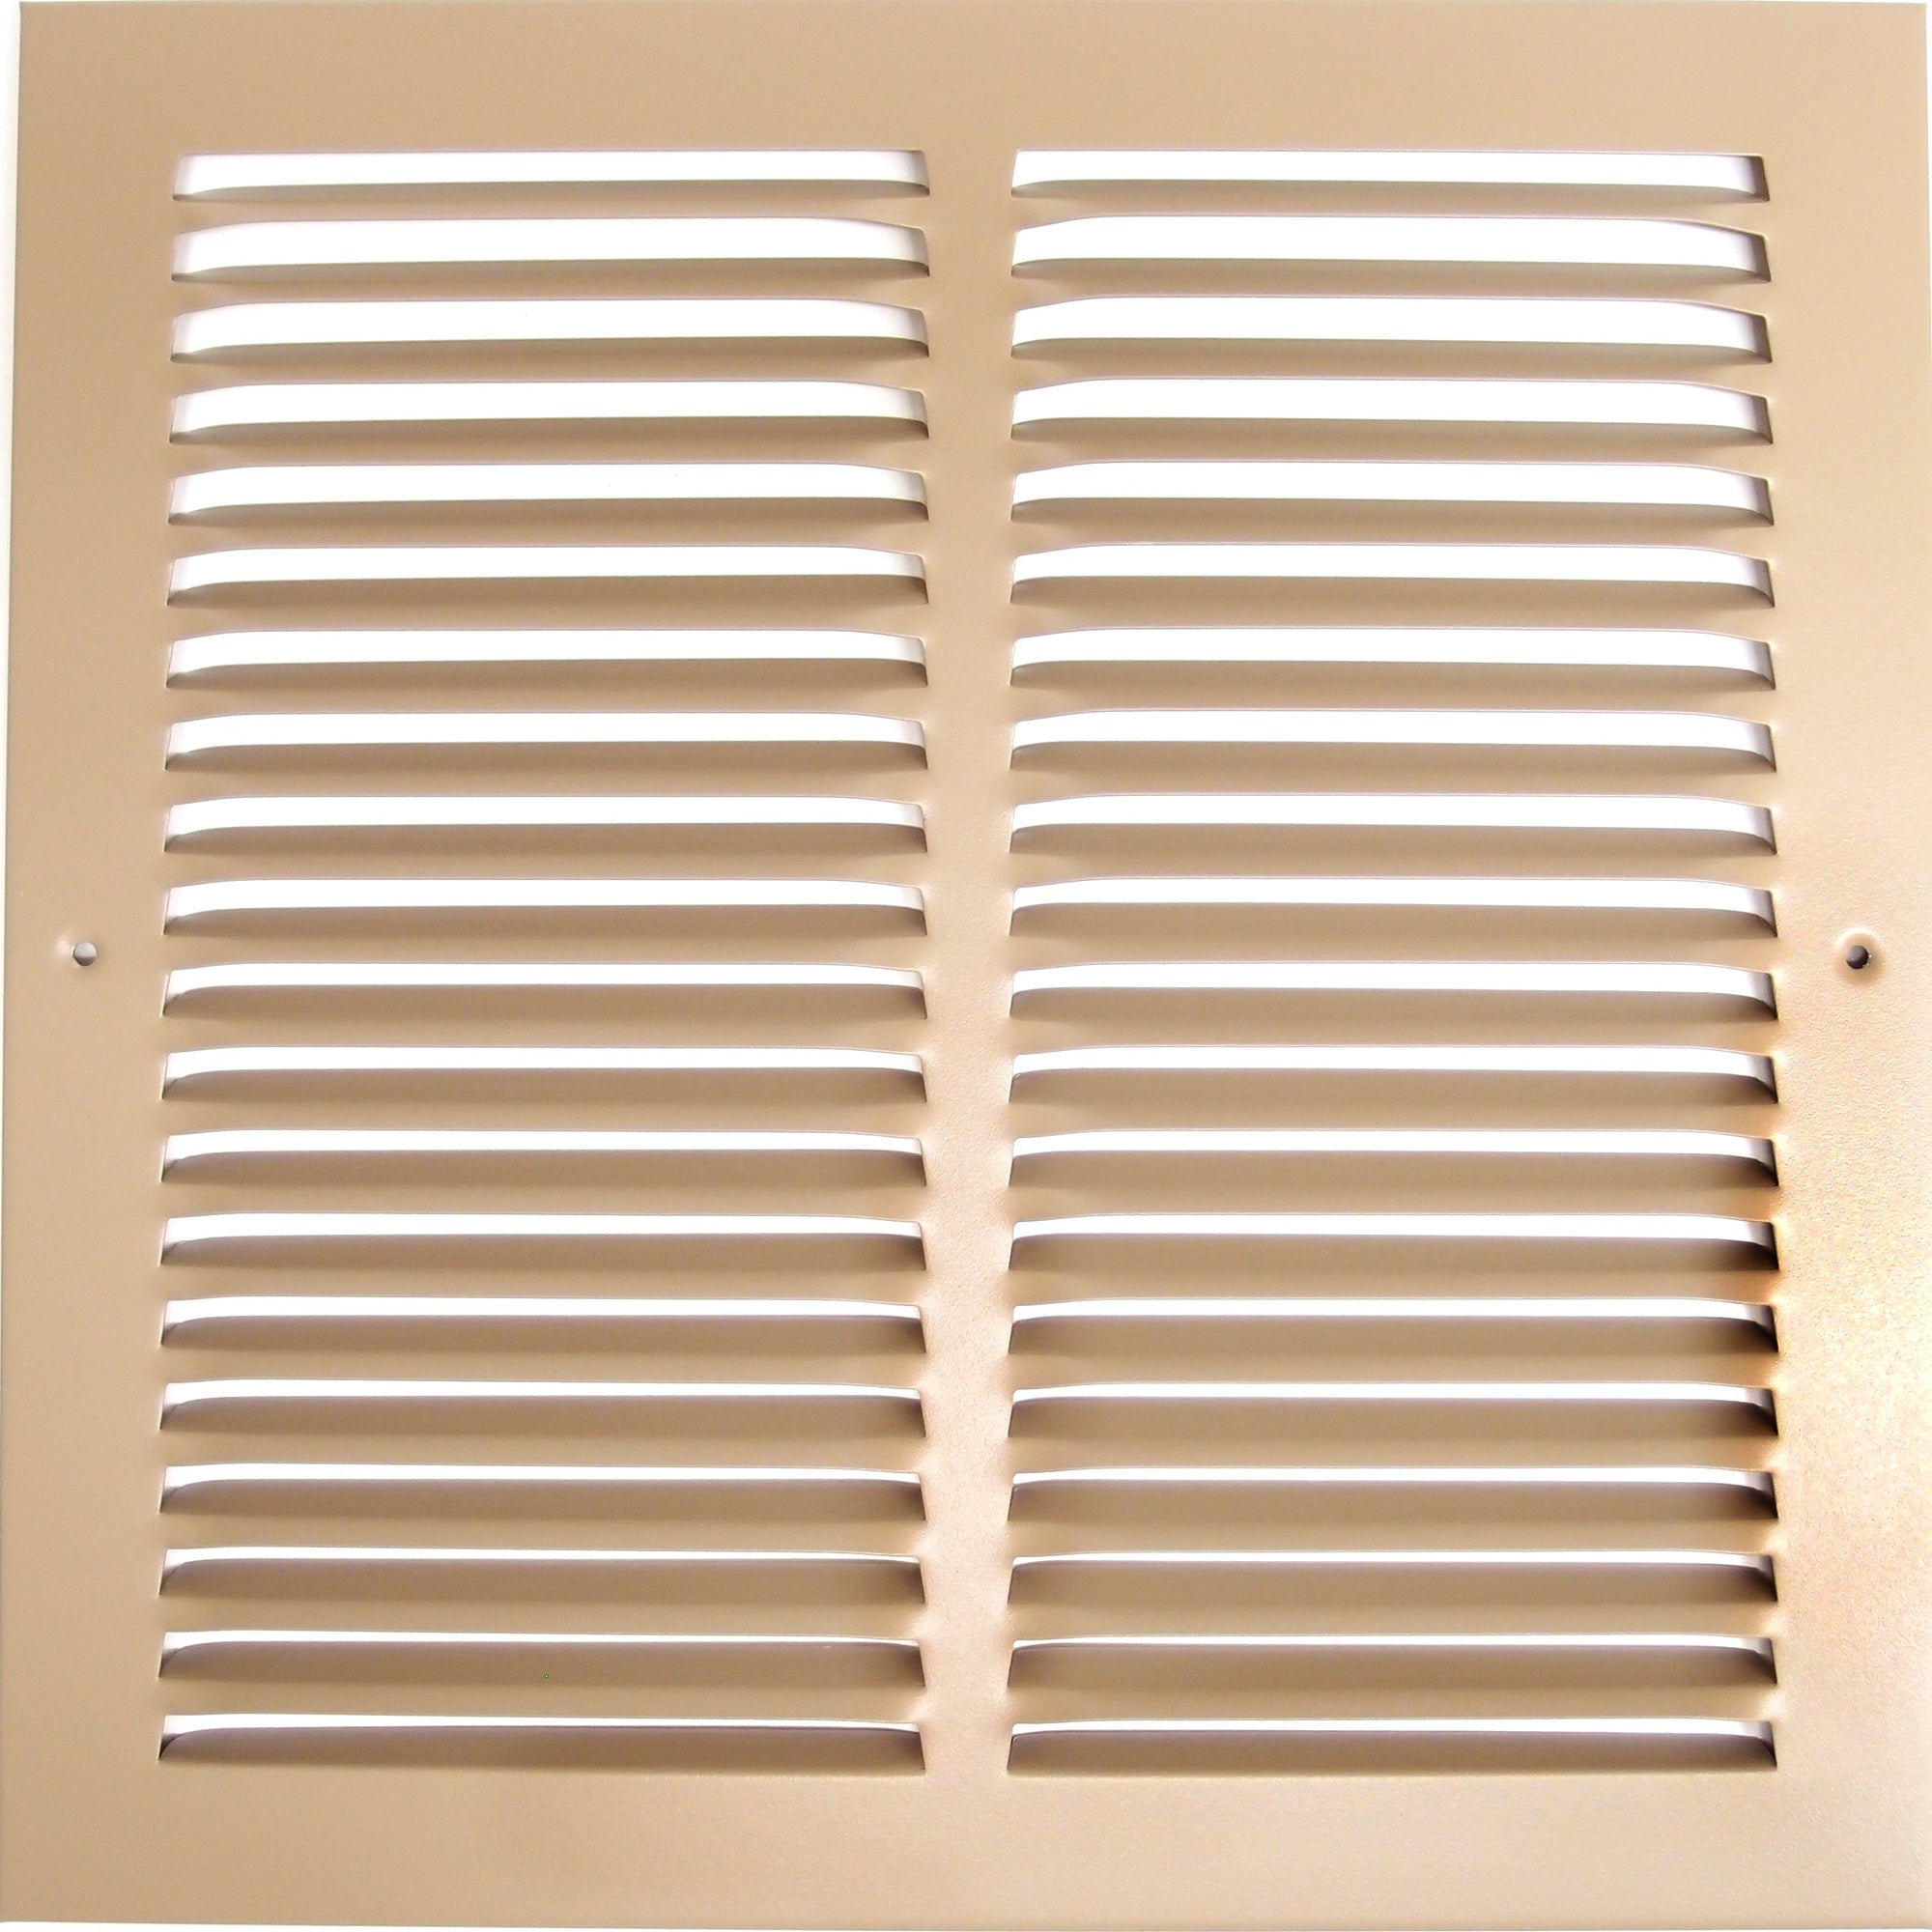 18" X 24" Air Vent Return Grilles - Sidewall and Ceiling - Steel